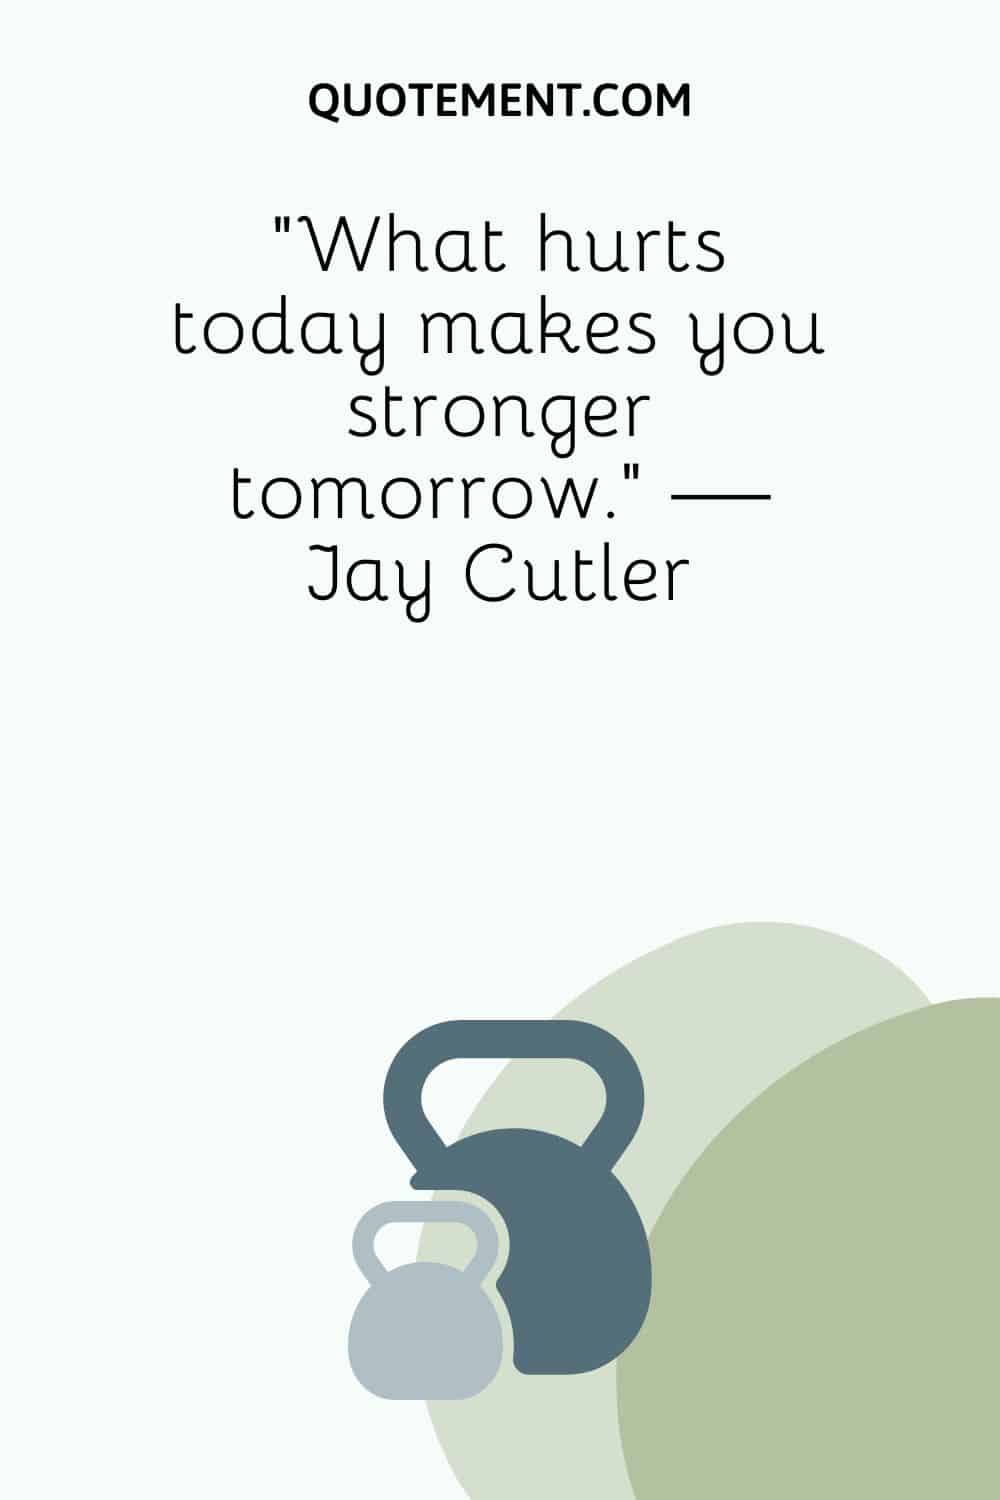 “What hurts today makes you stronger tomorrow.” — Jay Cutler